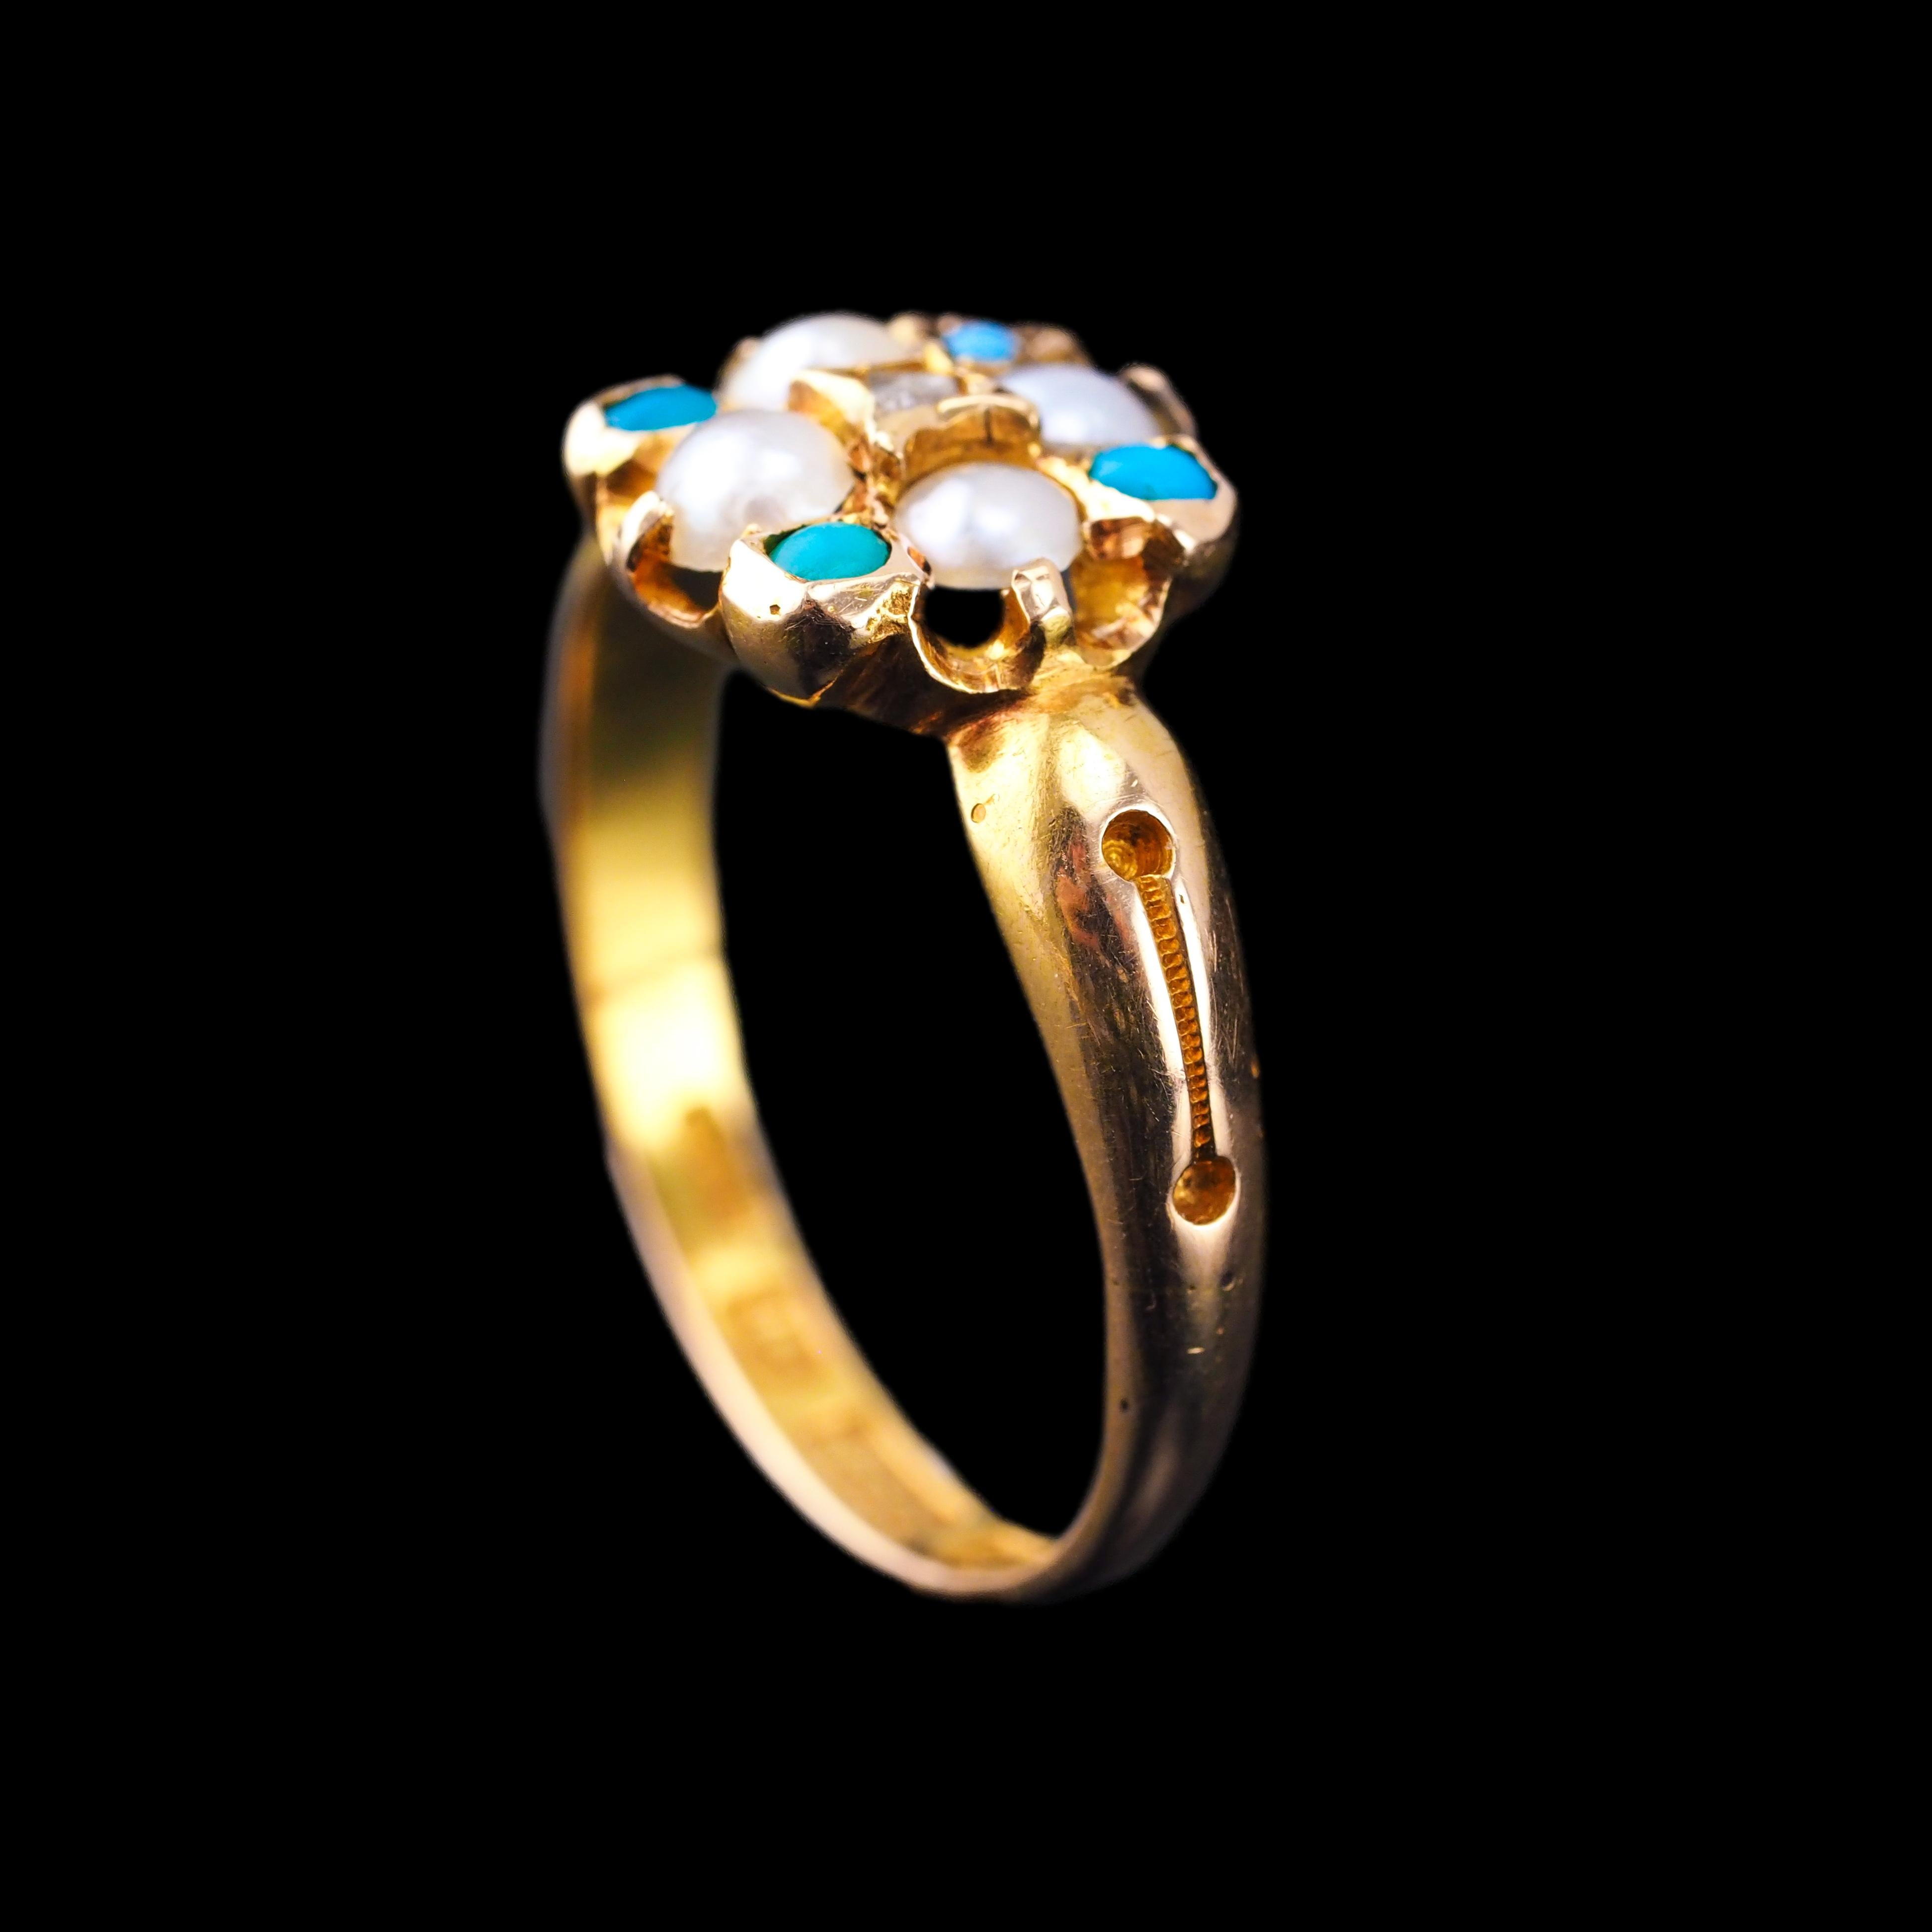 Antique Turquoise, Diamond & Pearl Ring 15K Gold Victorian Flower Cluster 1897 For Sale 11